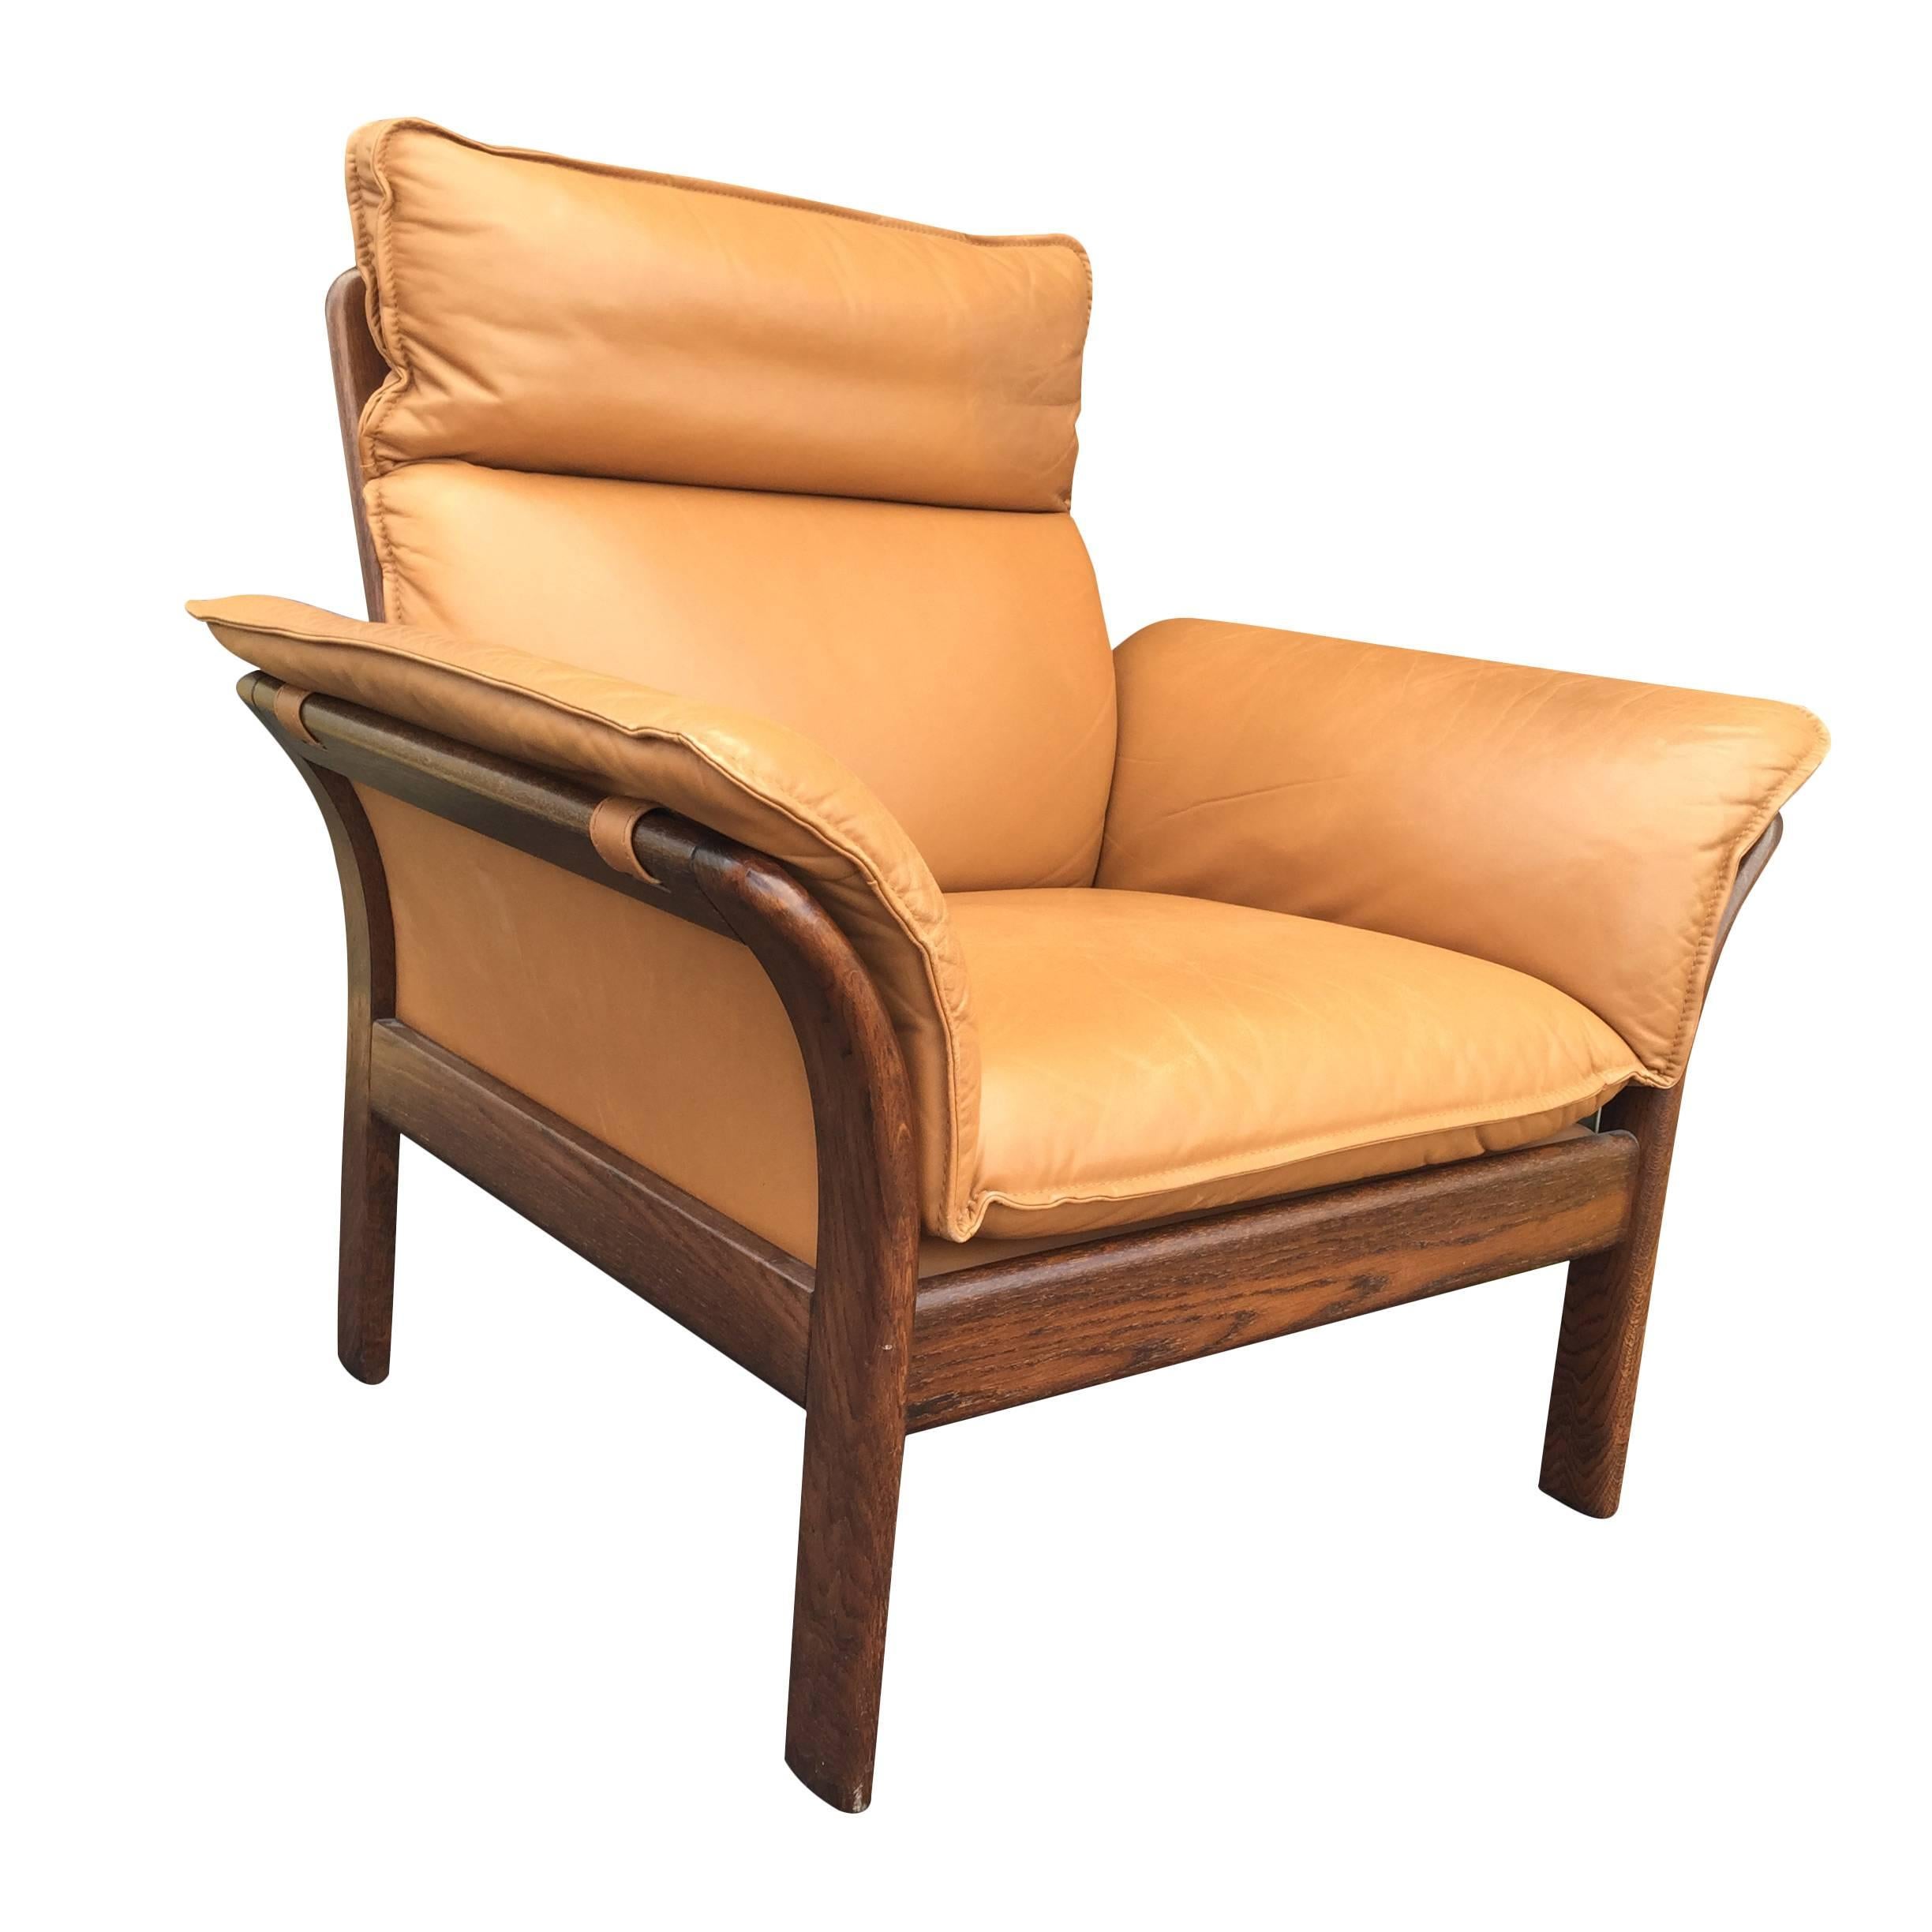 This chair has great lines and is comfortable! A sleek rosewood frame supports overstuffed camel colored leather cushions. Frame is is sturdy with some fading, leather shows minimal wear, namely some darkening on armrests and surface scratches on